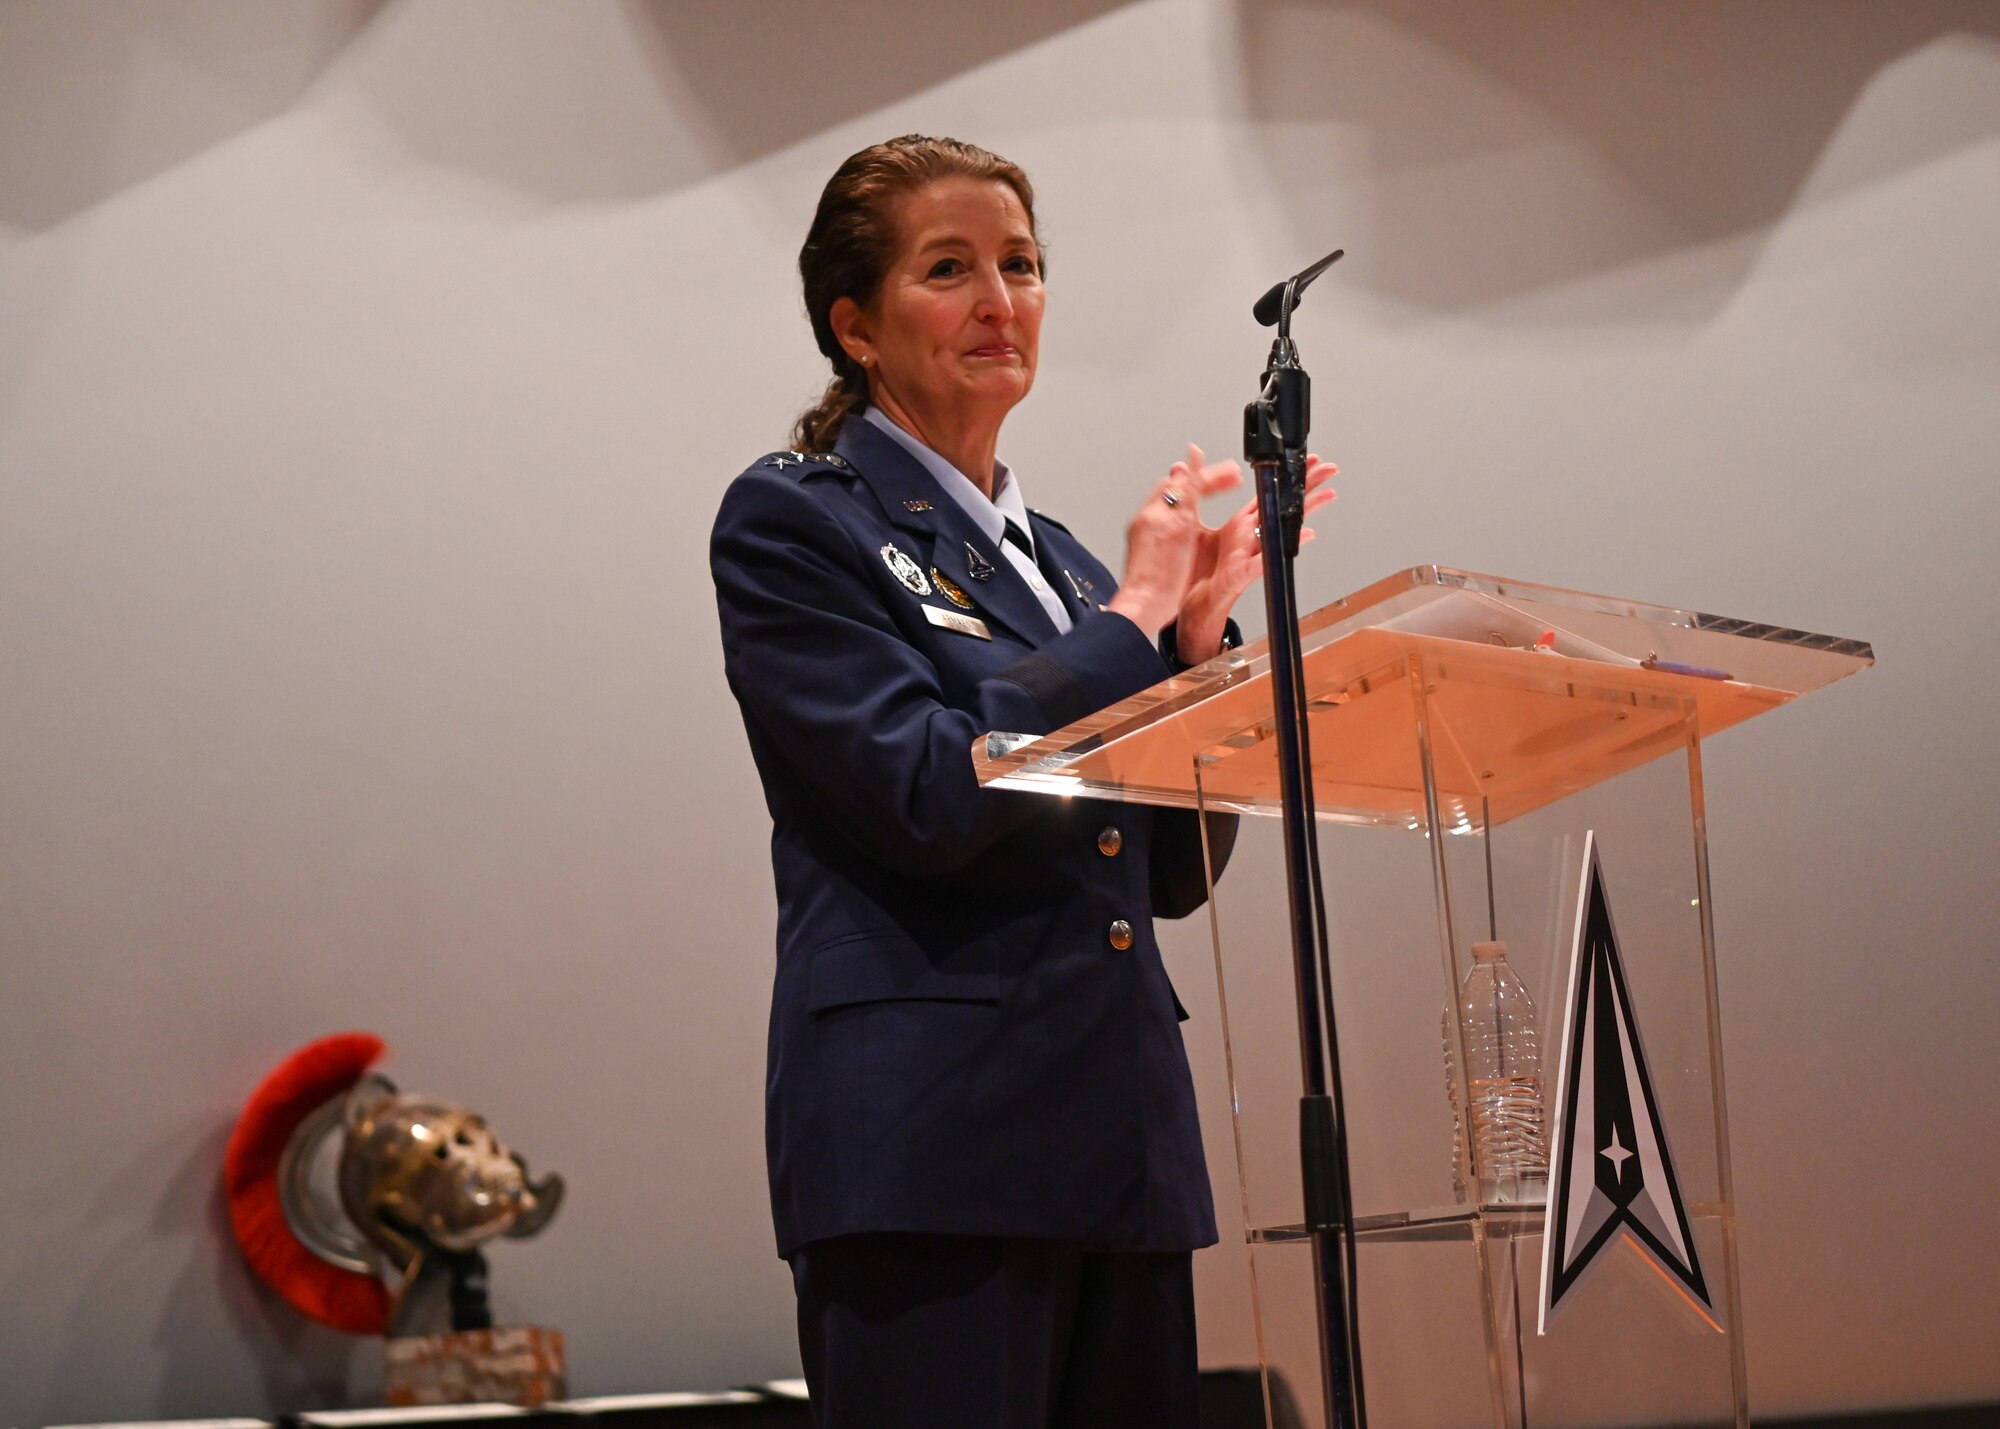 Lt. Gen. Nina Armagno, U.S. Space Force Headquarters director of staff, speaks at the 533rd Training Squadron graduation ceremony at Vandenberg Space Force Base, Calif., Feb. 24, 2023. Armagno earned her commission and graduated from the U.S. Air Force academy with a Bachelor of Science in biology in June 1988. (U.S. Space Force photo by Senior Airman Tiarra Sibley)